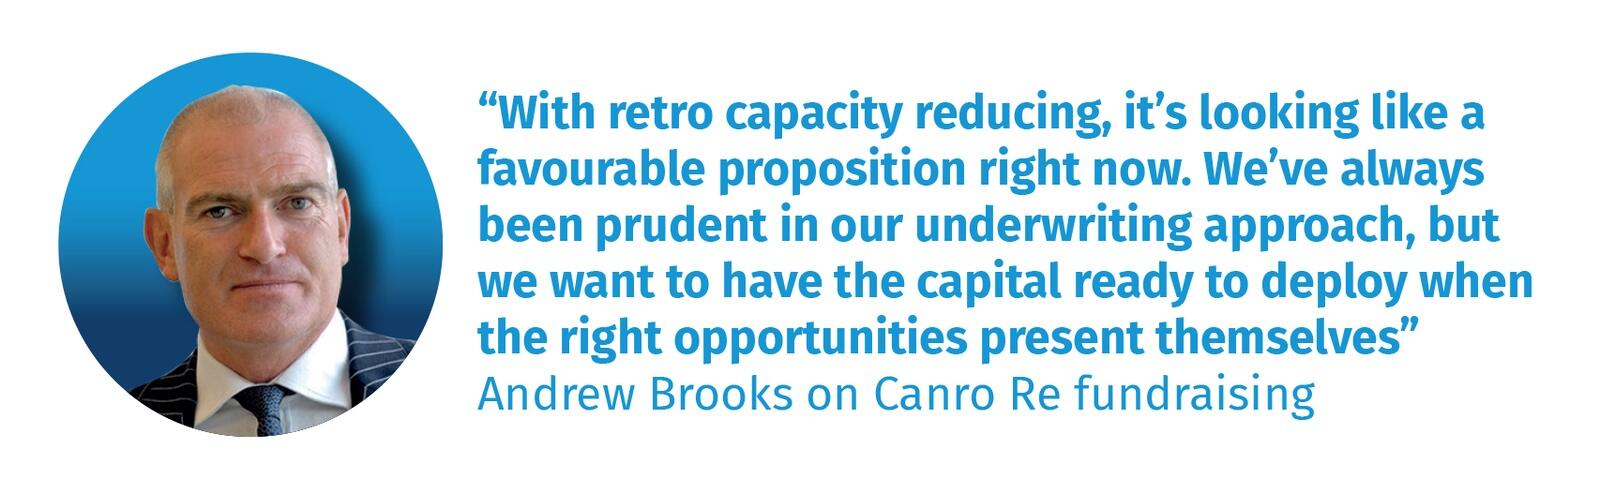 Andrew Brooks on Canro Re fundraising